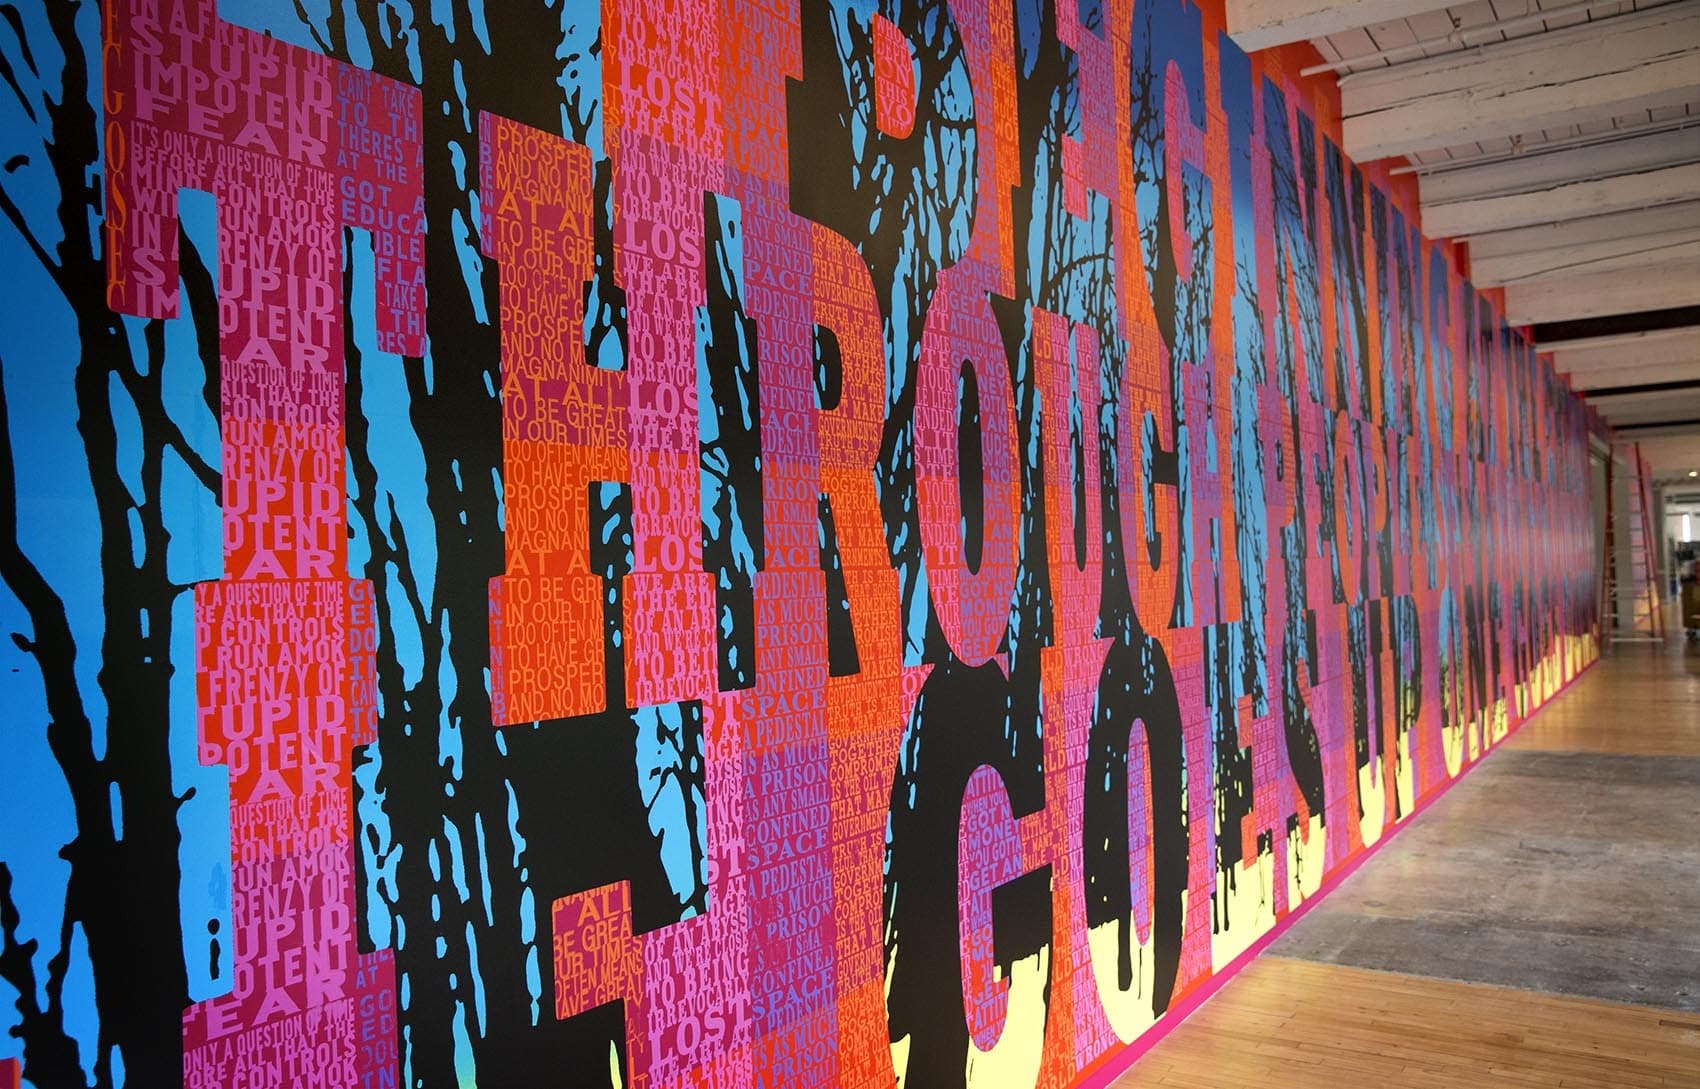 Part of Boston artist Joe Wardwell's &quot;Hello America: 40 Hits From the 50 States&quot; installed at MASS MoCA. (Robin Lubbock/WBUR)